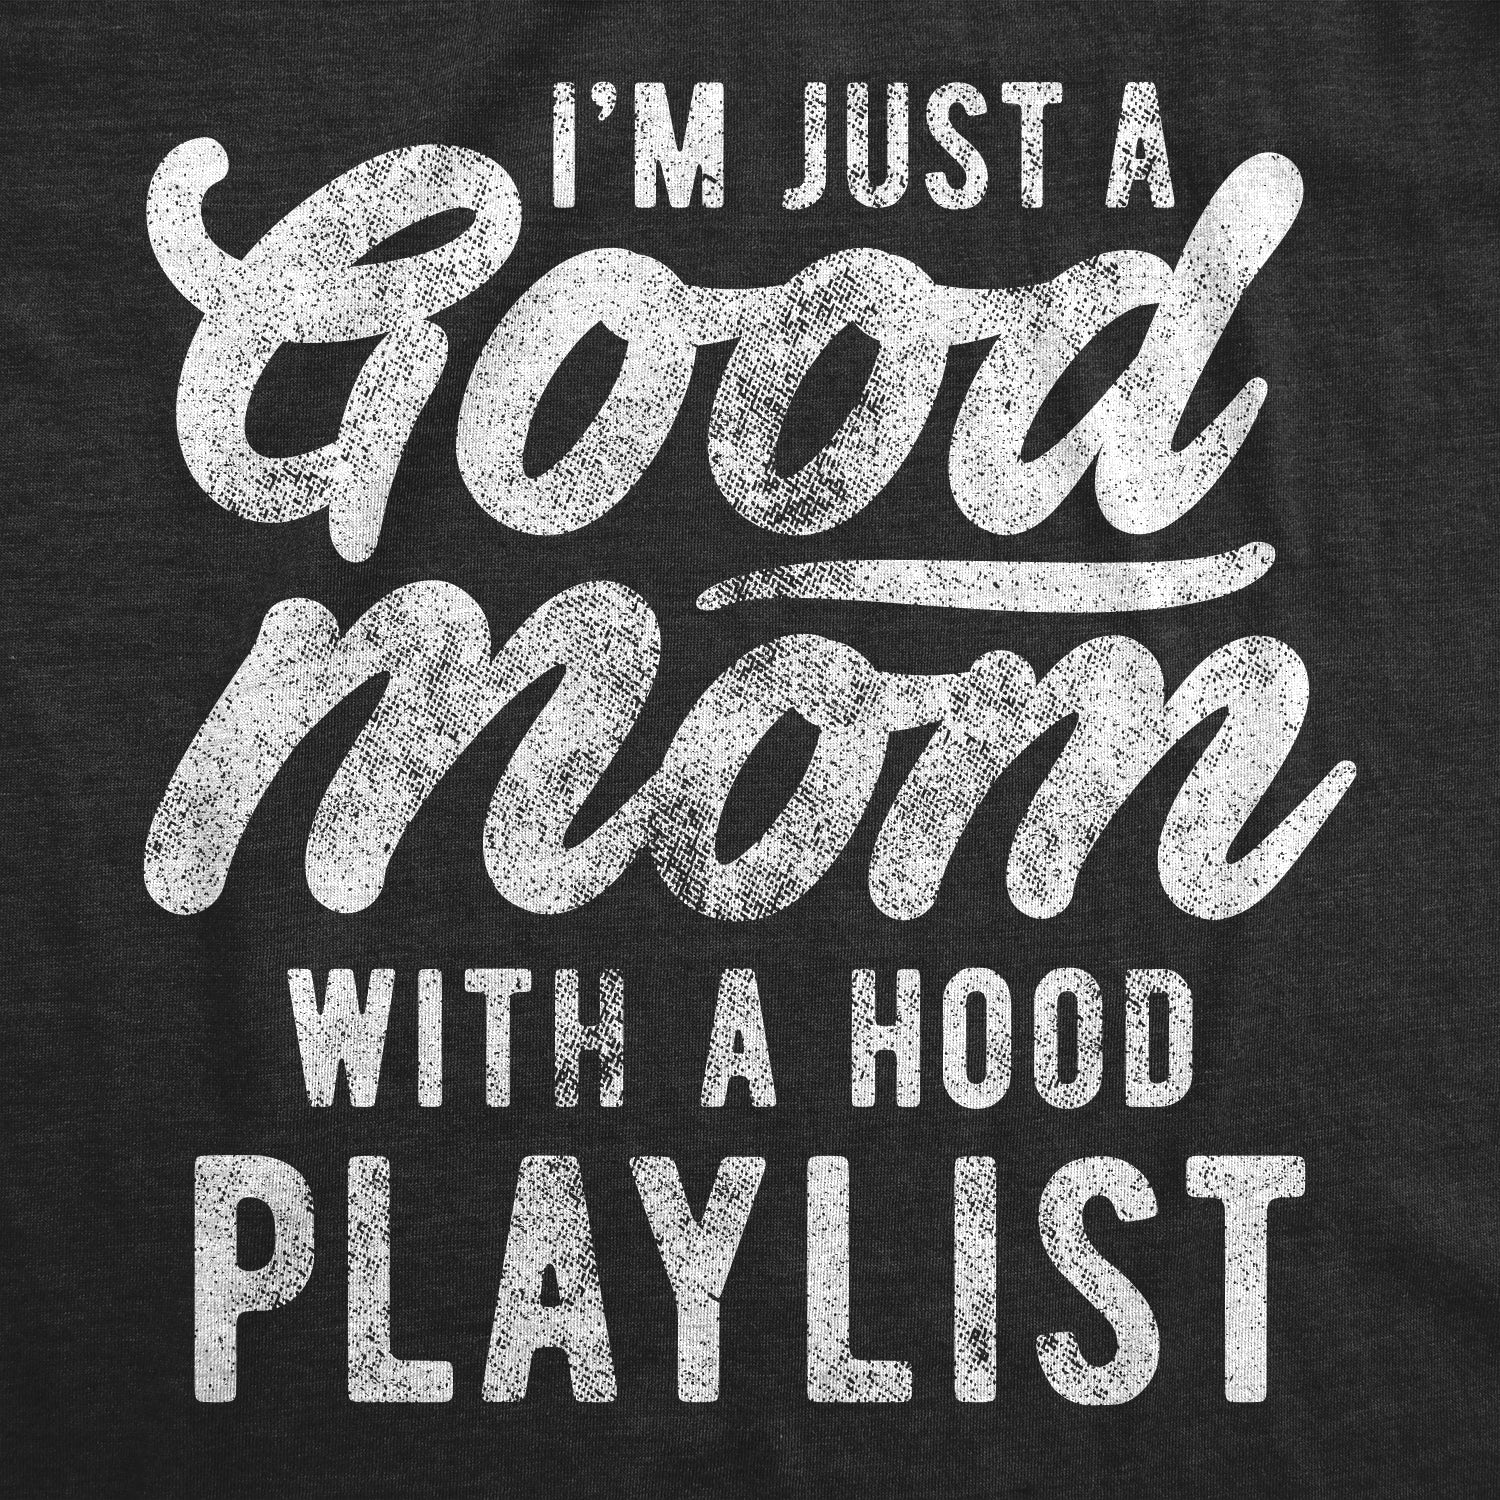 Funny Heather Black - Hood Playlist I'm Just A Good Mom With A Hood Playlist Womens T Shirt Nerdy Mother's Day Drinking Wine Tee